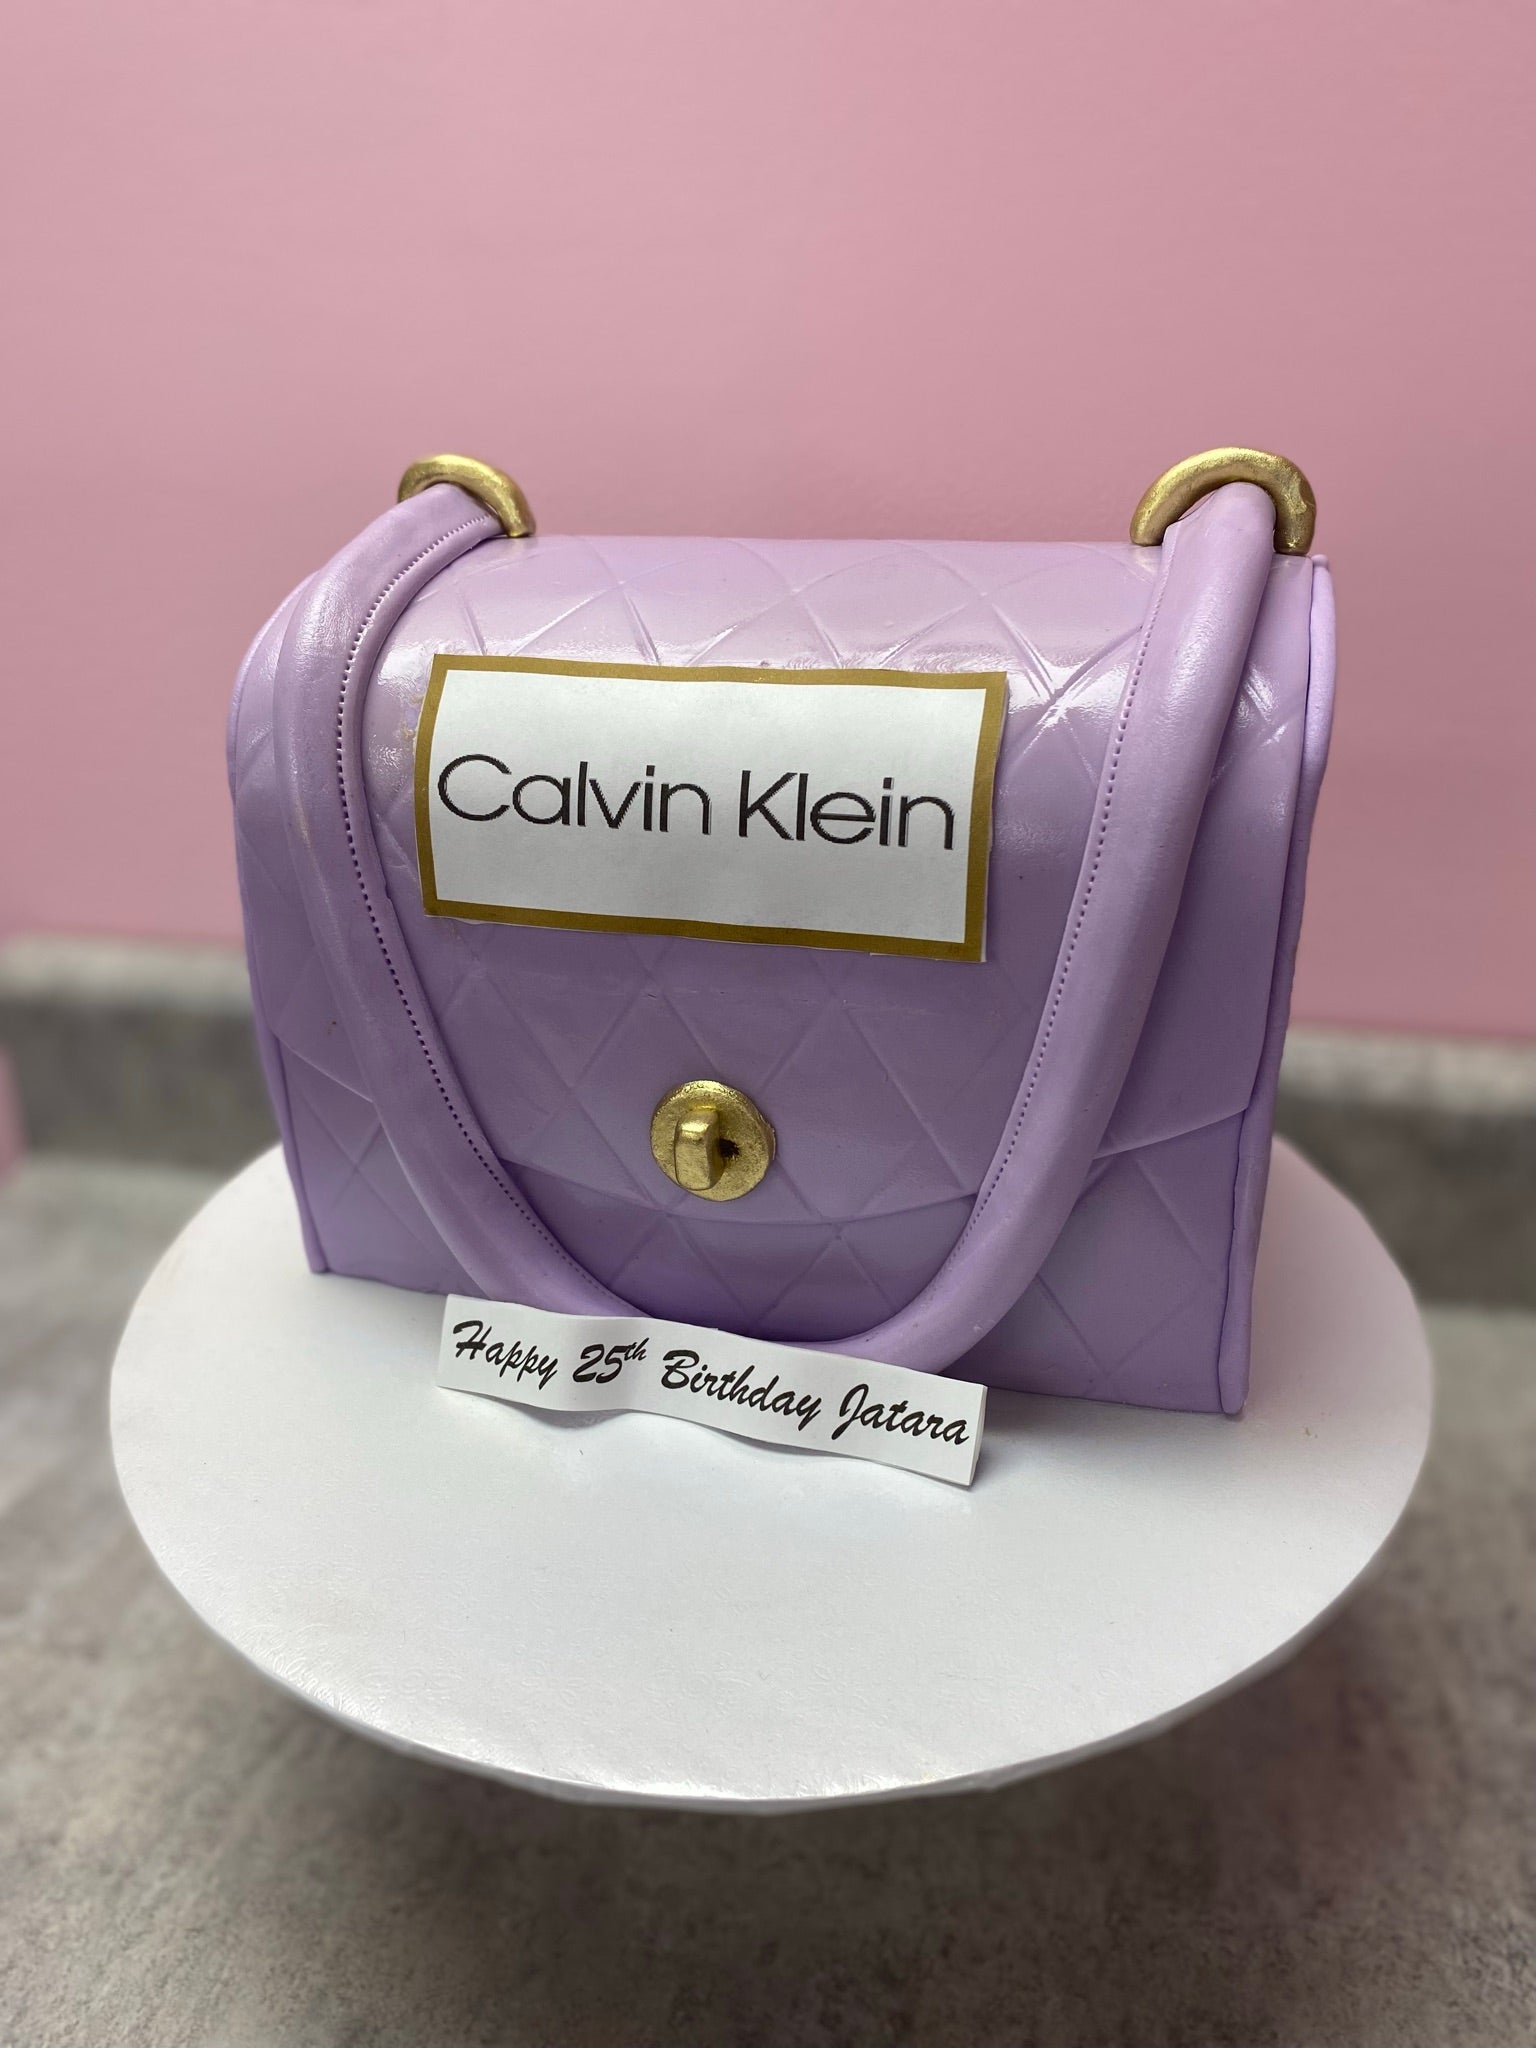 Calvin Klein Smartphone Bag Pearly Pink | Buy bags, purses & accessories  online | modeherz